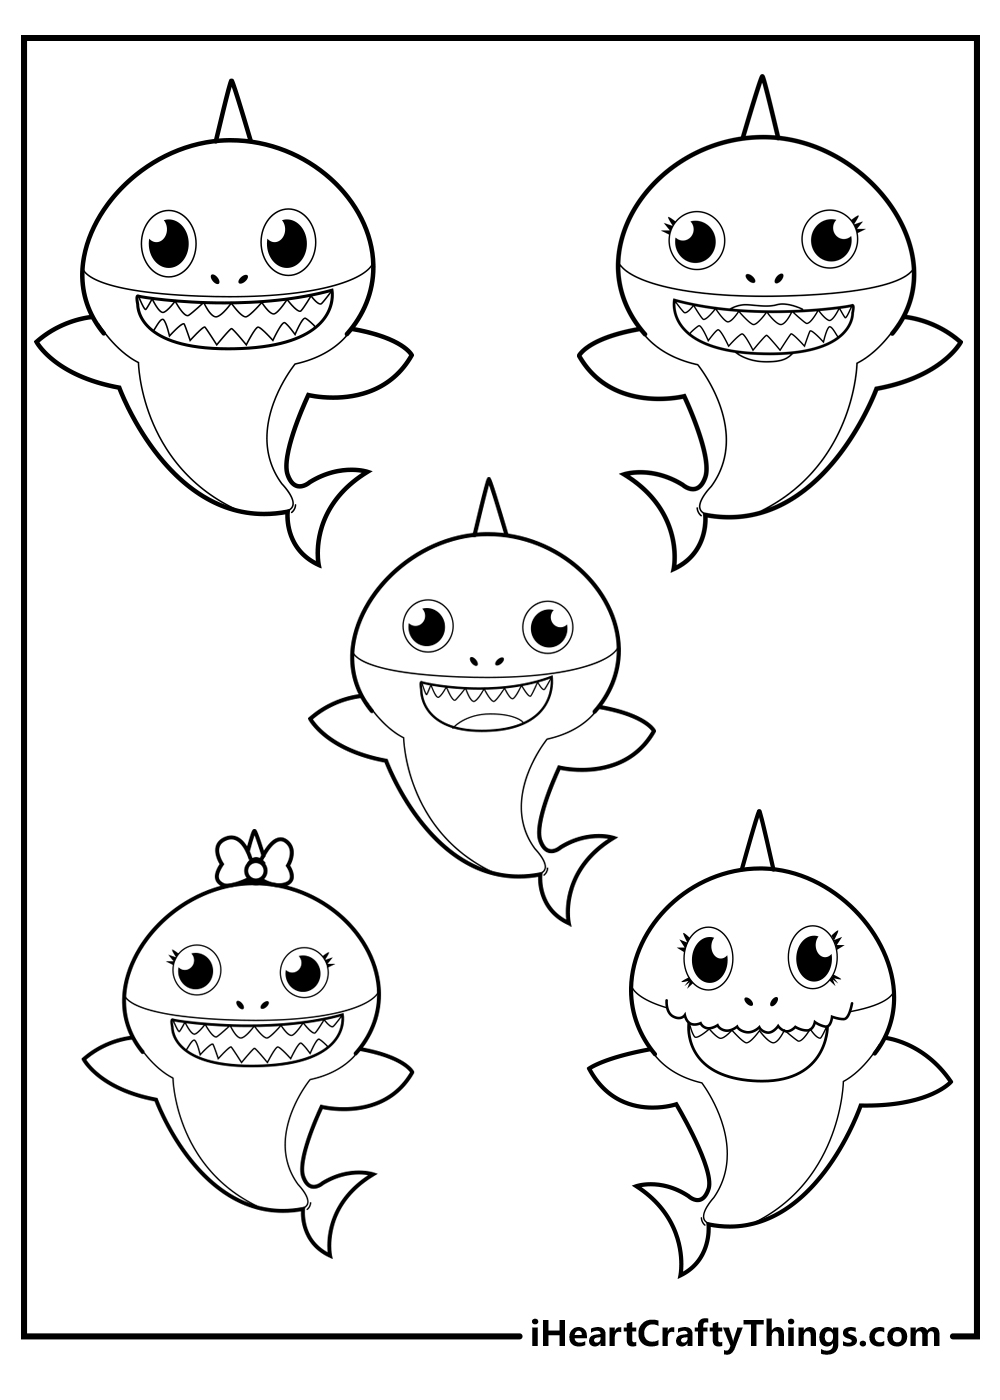 Baby Shark - Free Coloring Page for Kids